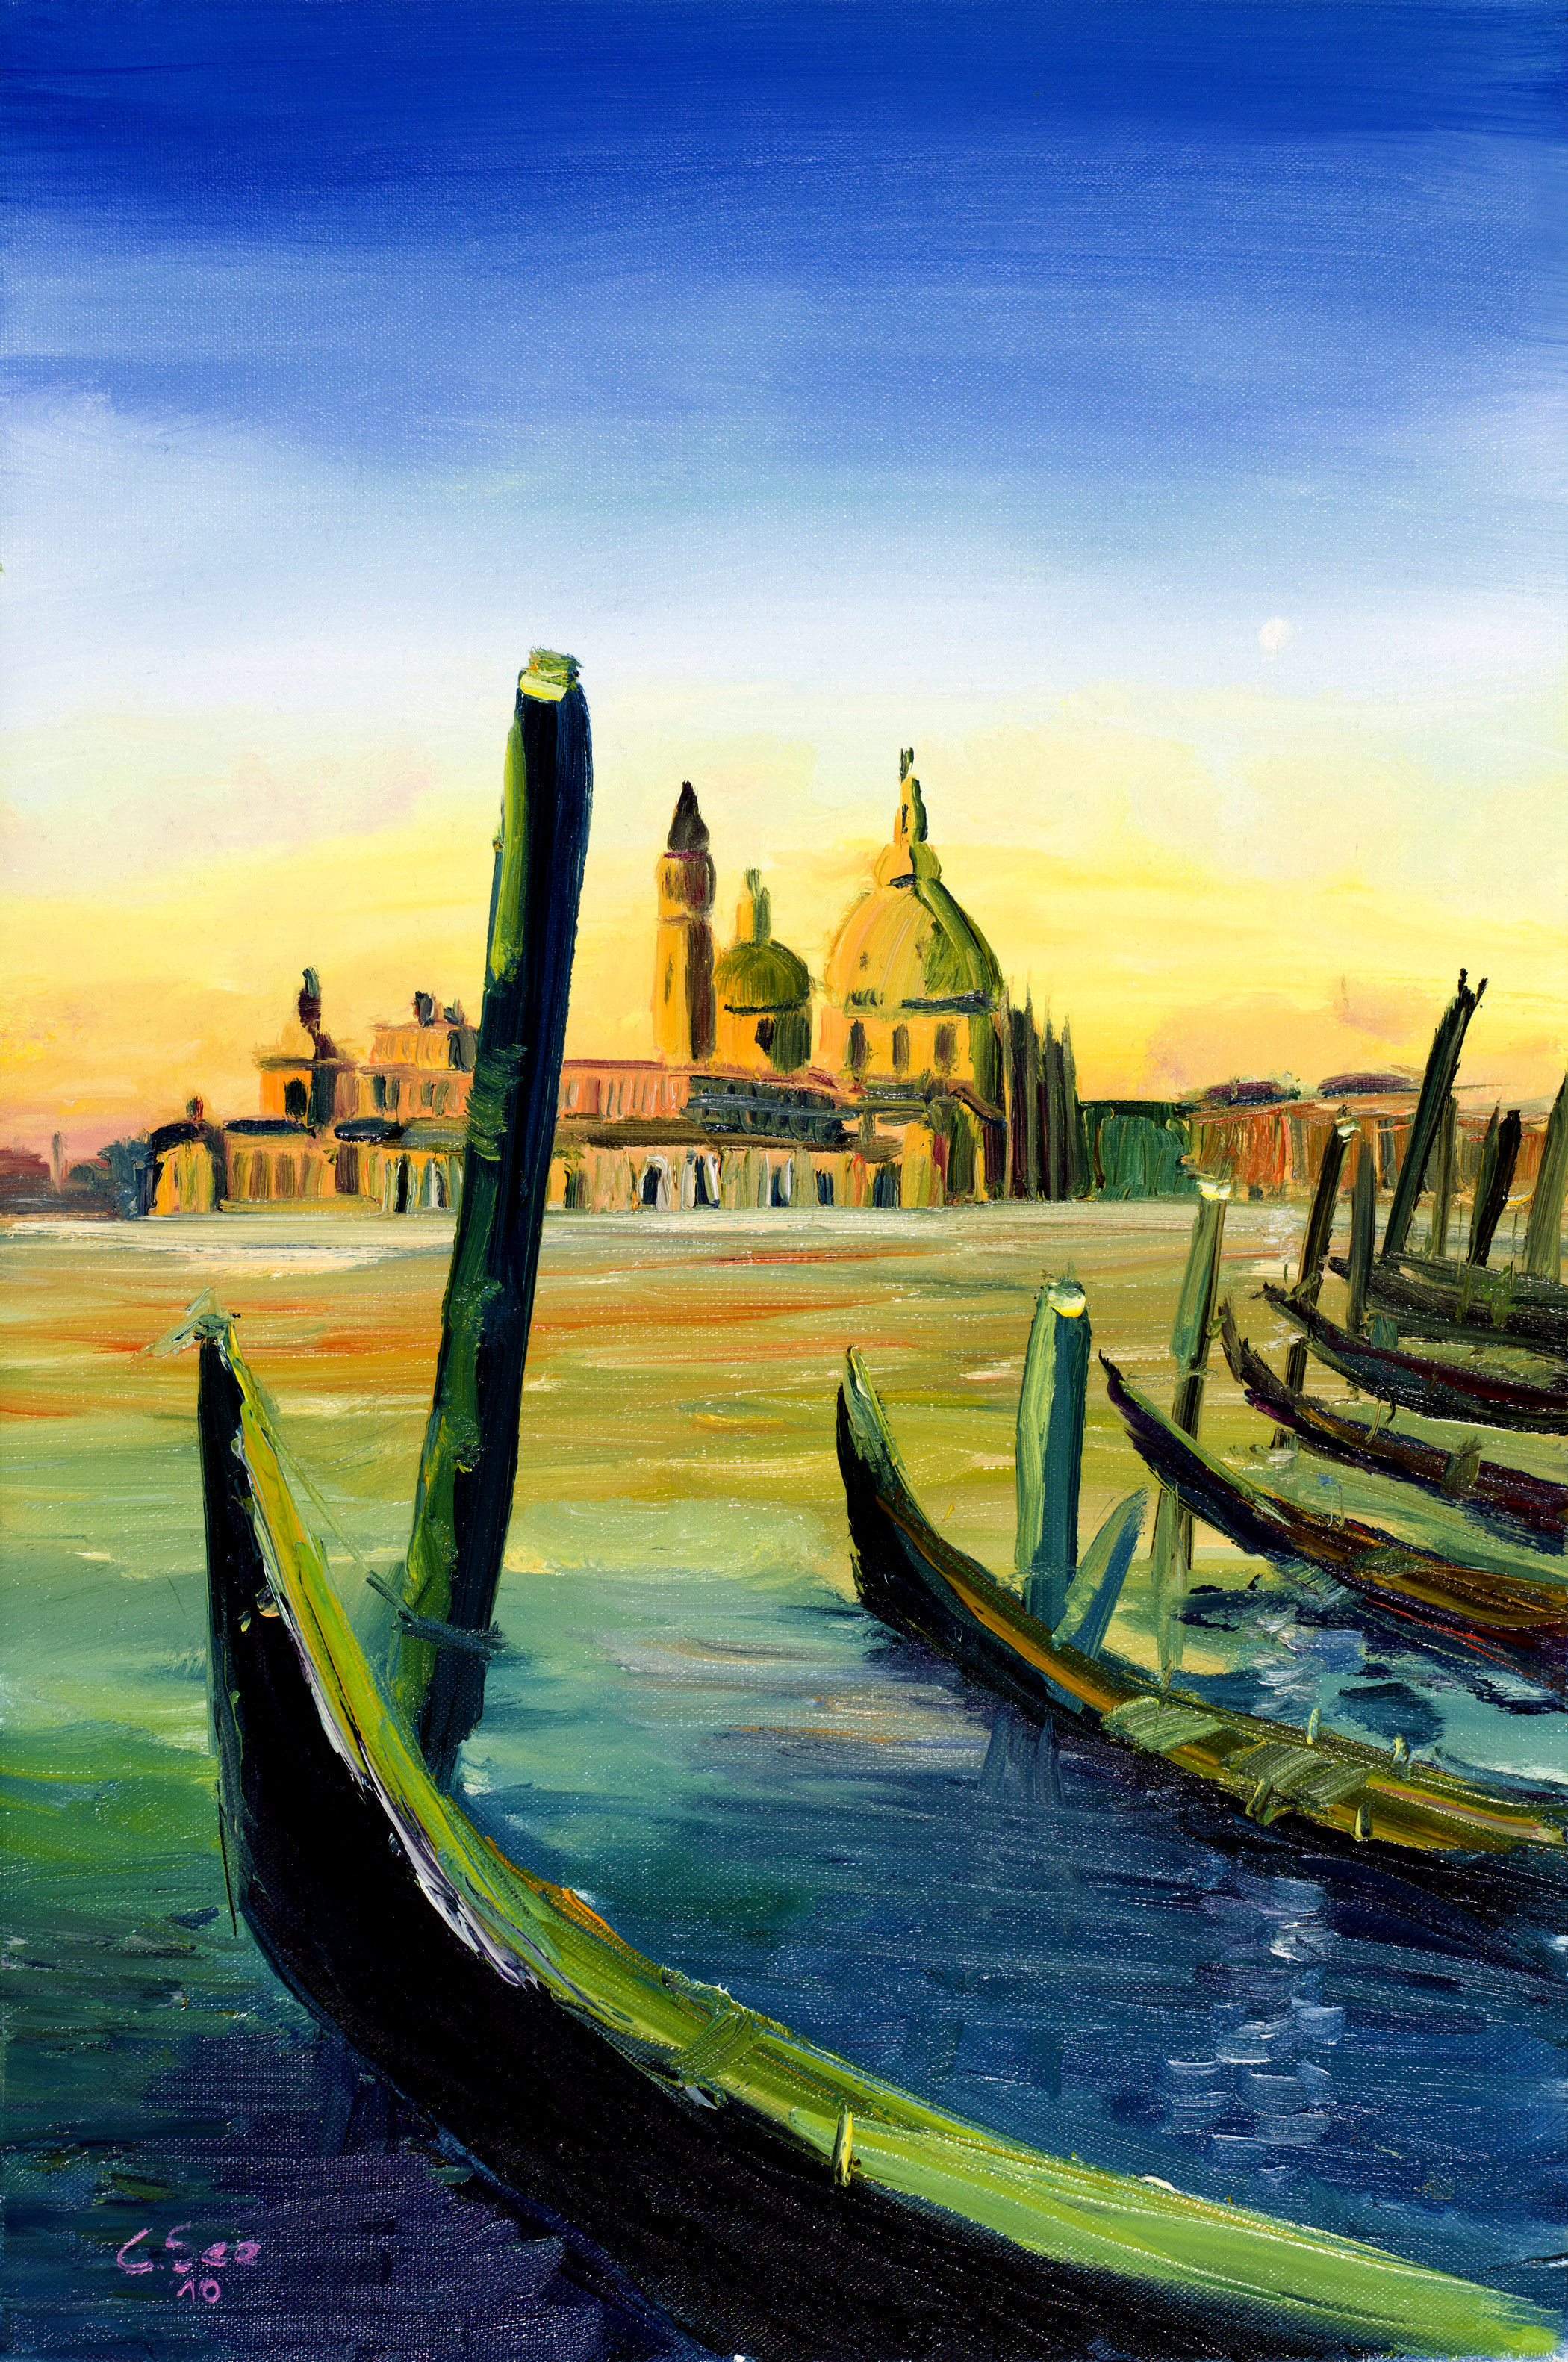 Venice oil painting, Van Gogh style by Christian Seebauer